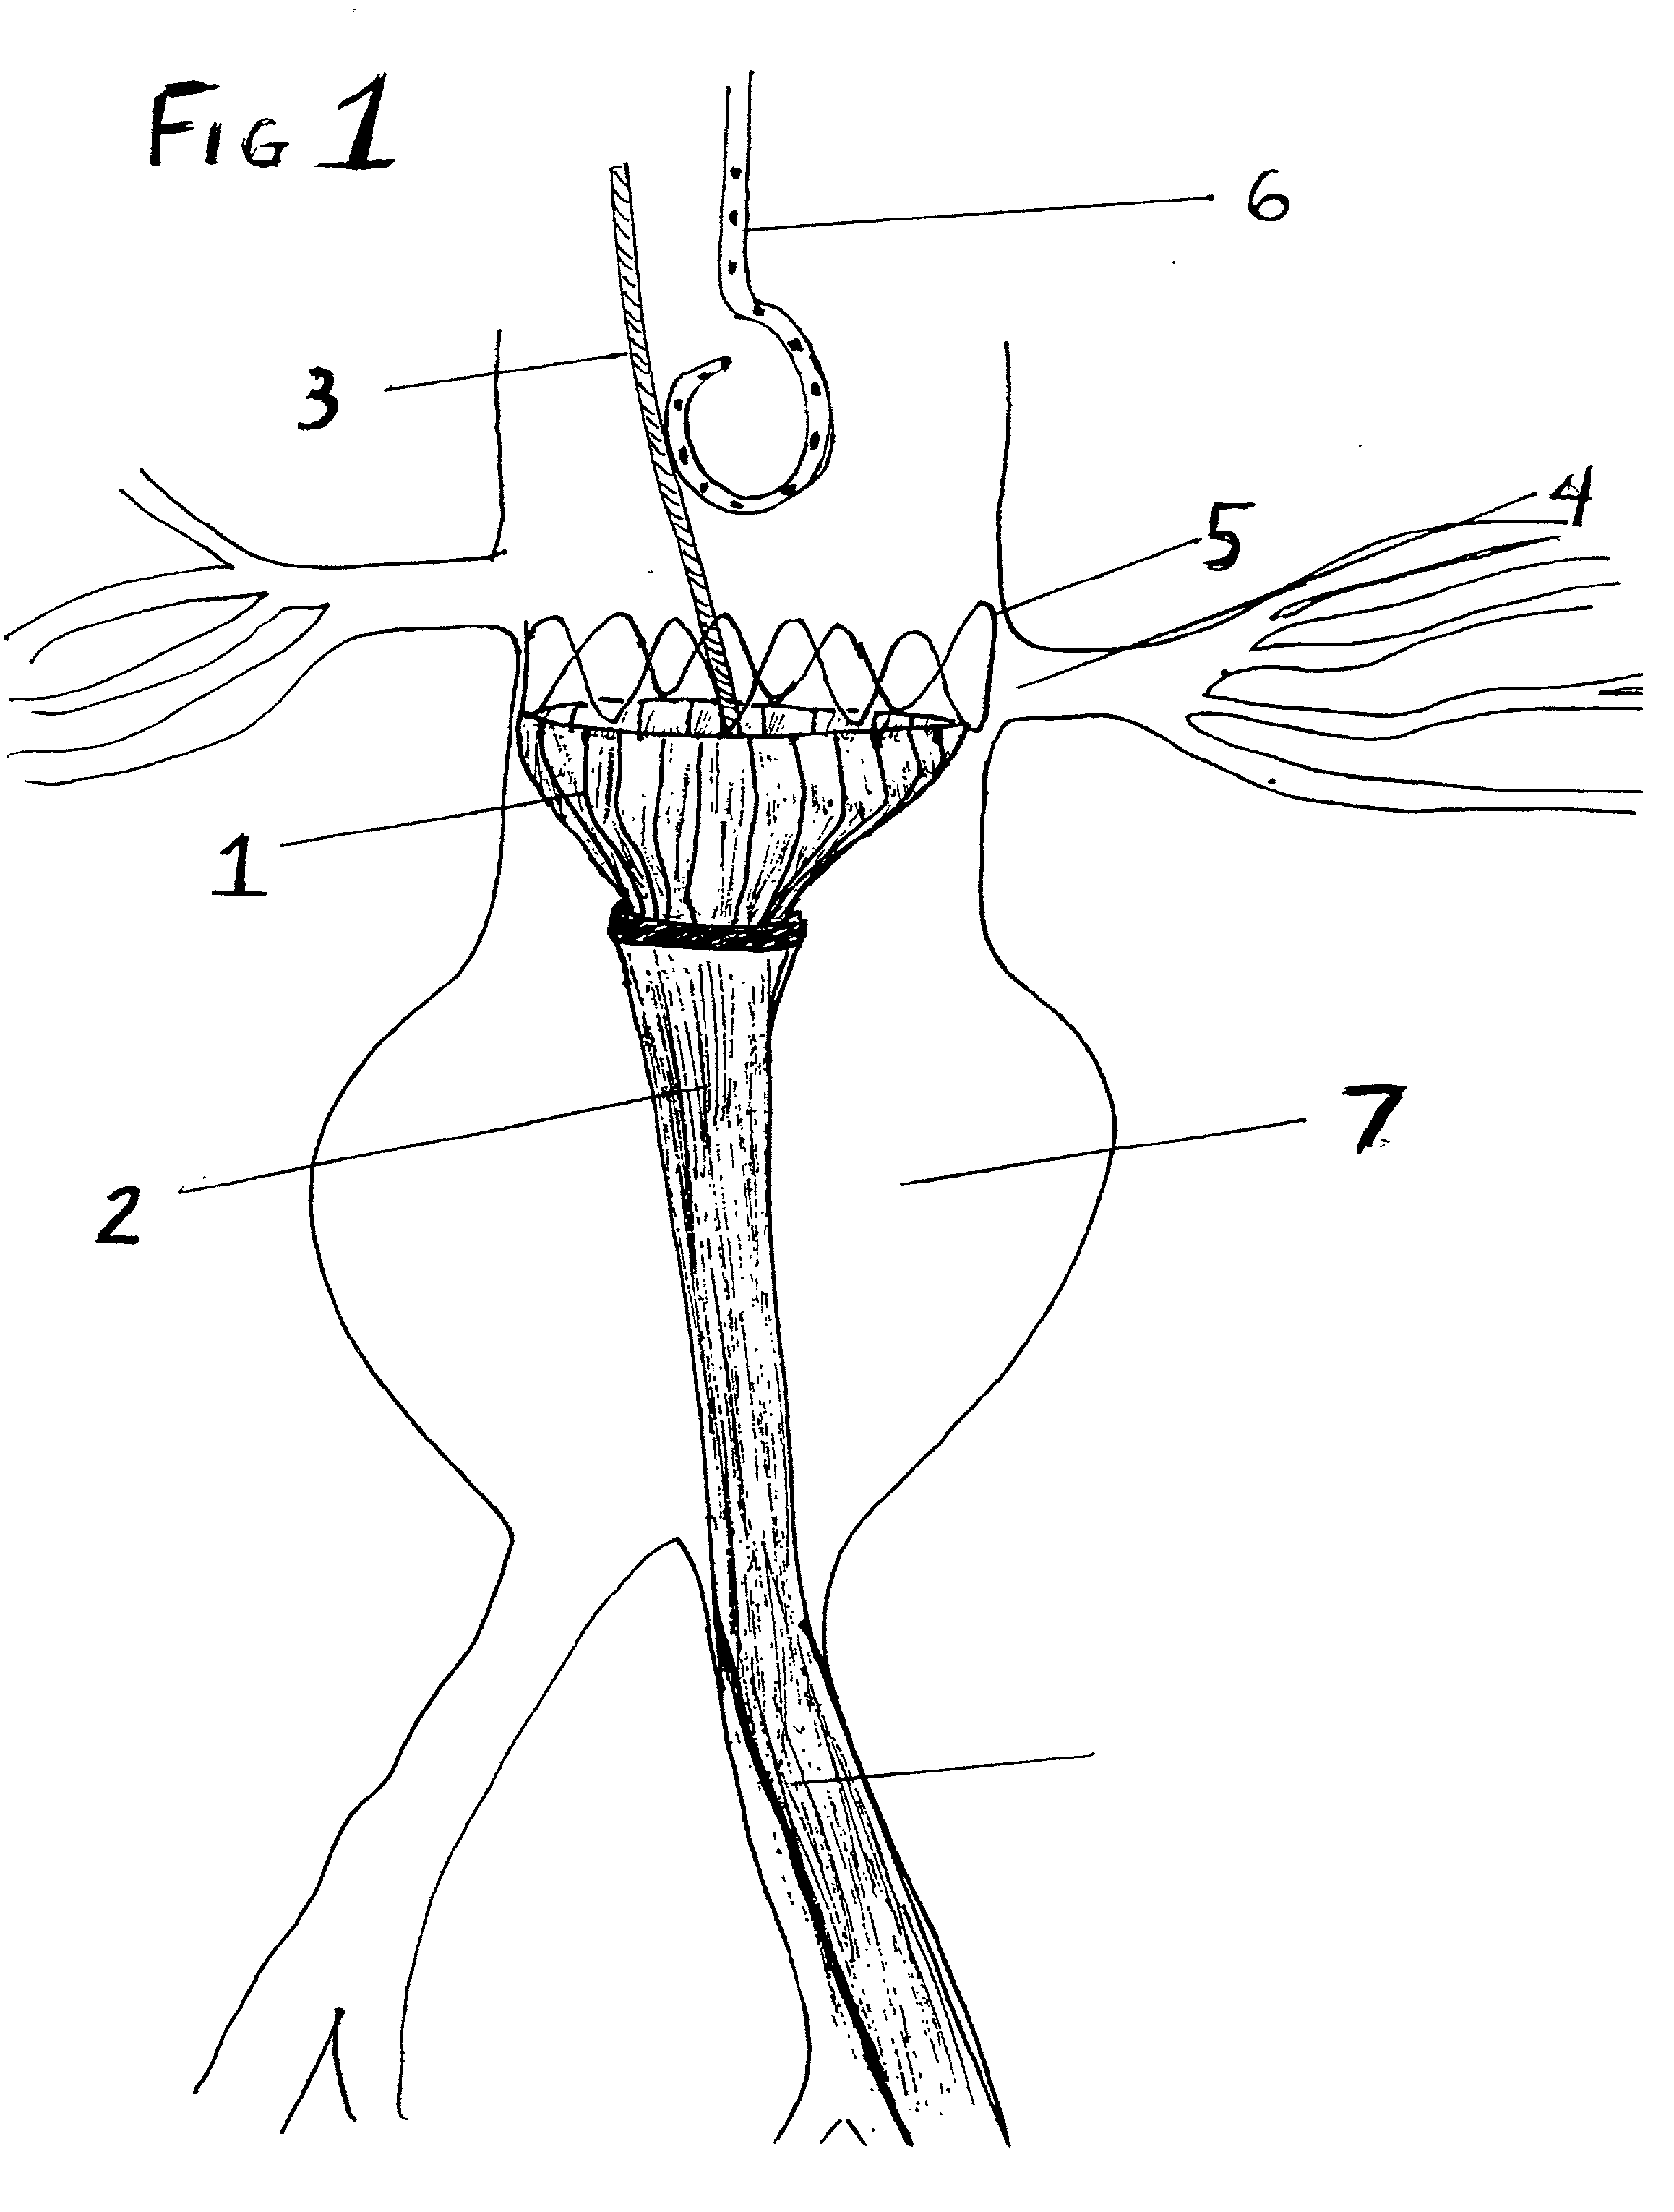 Tapered endovascular stent graft and method of treating abdominal aortic aneurysms and distal iliac aneurysms